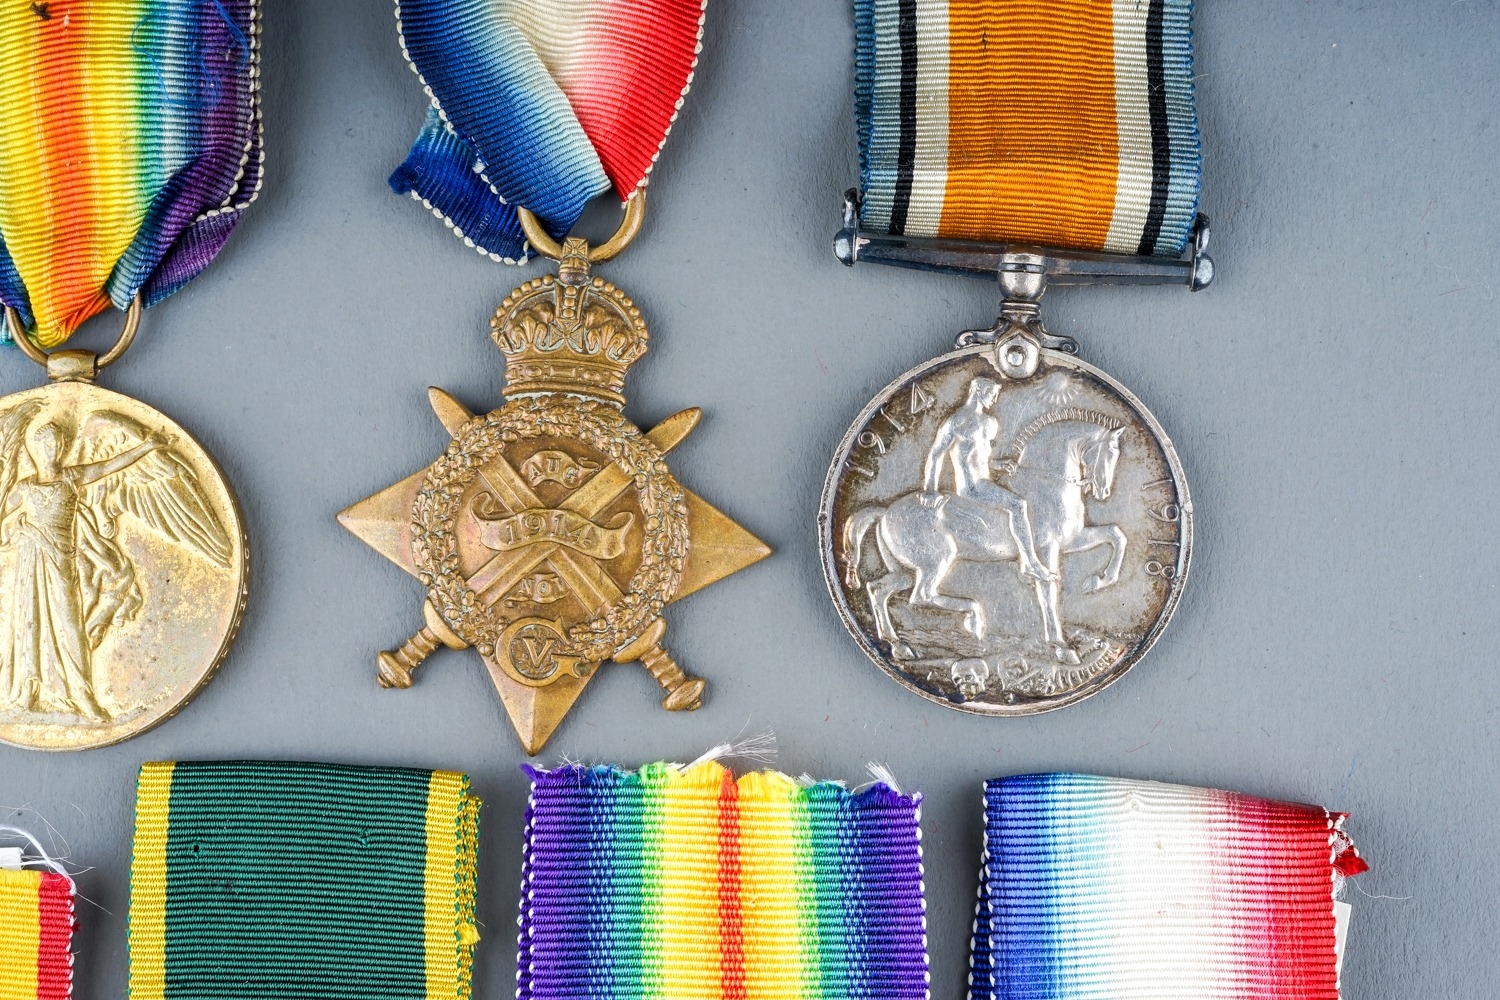 A collection of British Medals. Great War Pair - R-29124 A Cpl H H Simpkins K R Rif C. Condition - Image 11 of 12